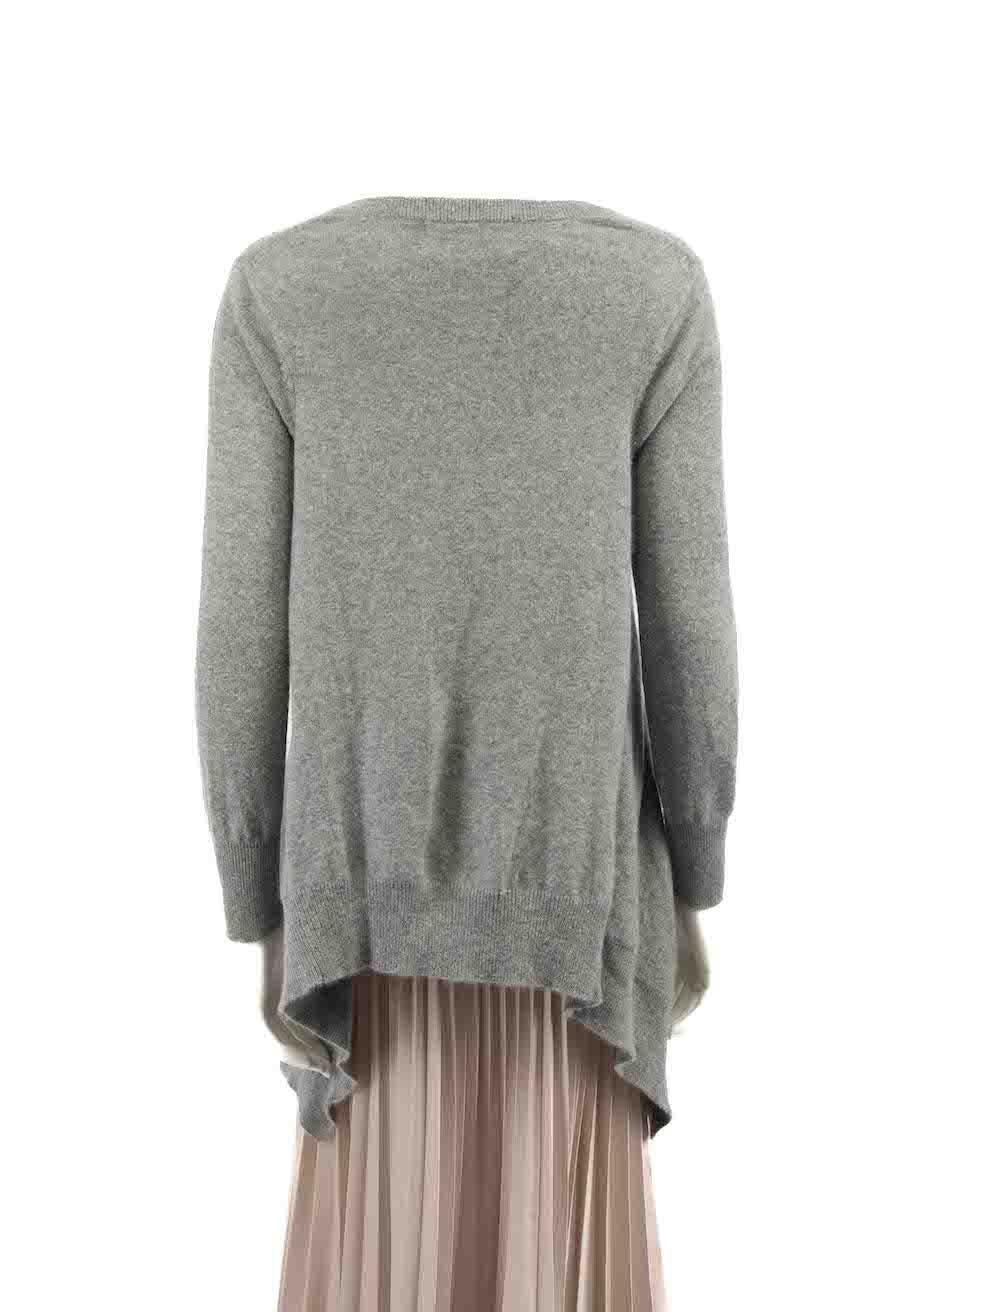 Madeleine Thompson Grey Cashmere Drape Hem Knit Top Size S In Good Condition For Sale In London, GB